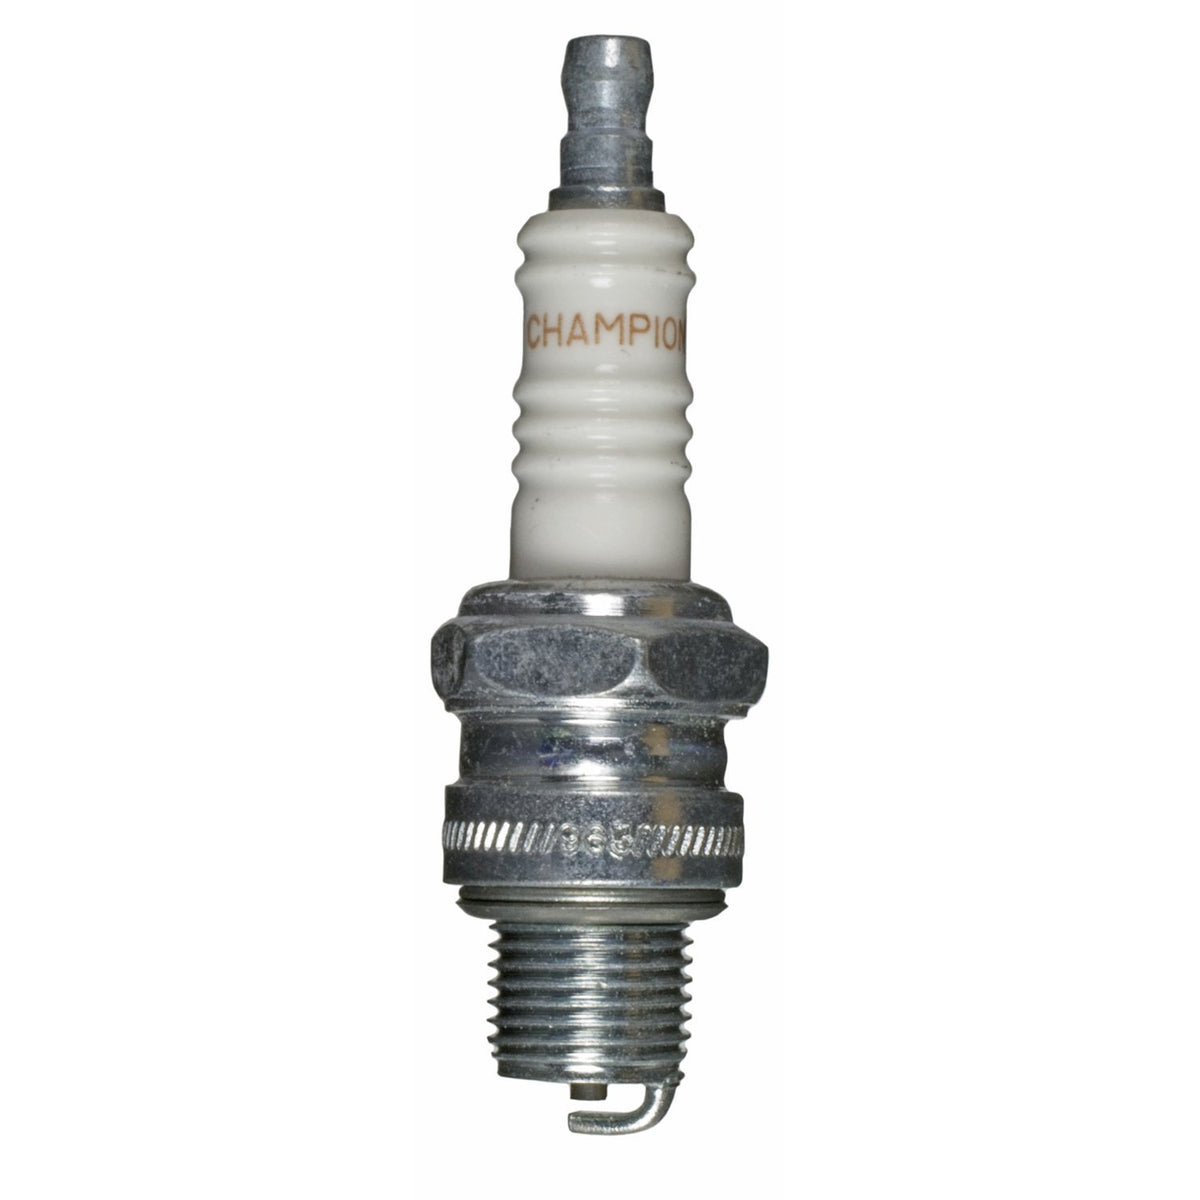 Champion® 931-1 Copper Plus® Small Engine Replacement Spark Plug